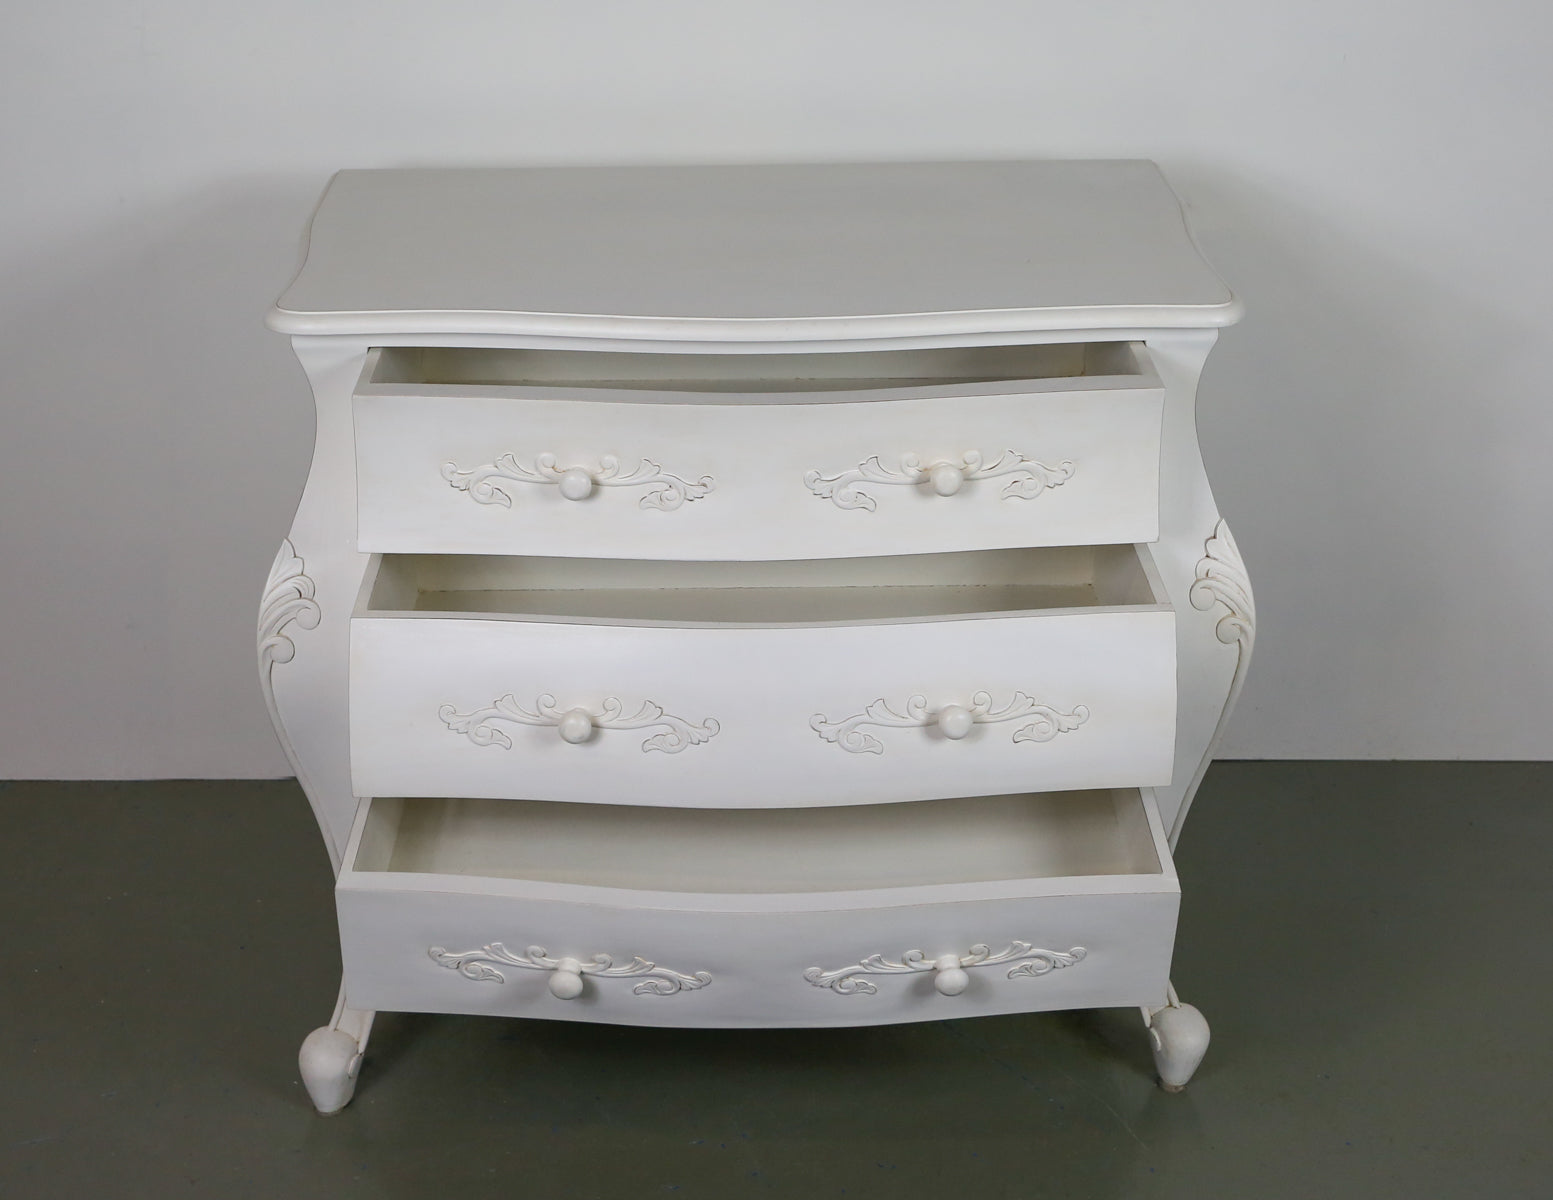 French Country Urban Living Chest of Drawers